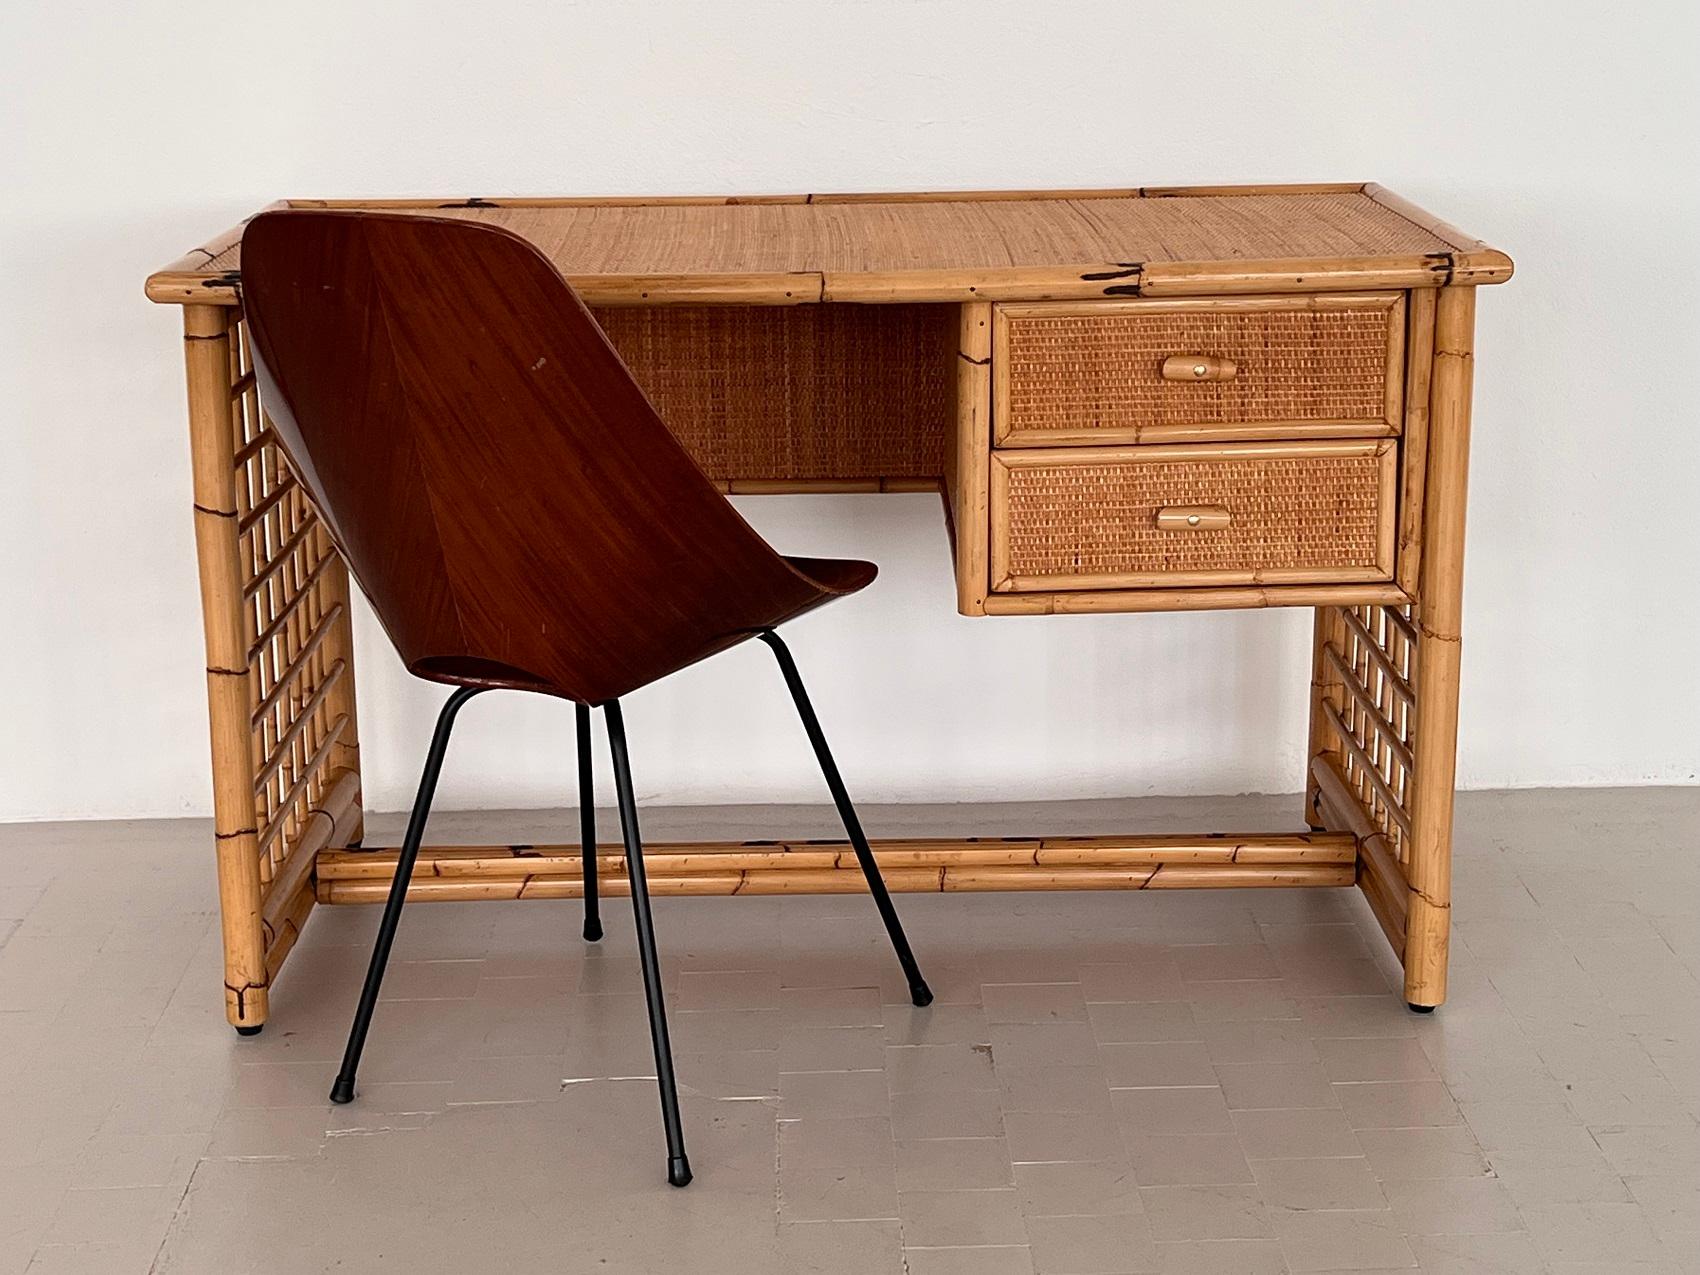 Italian Midcentury Bamboo and Rattan Desk or Vanity with two Drawers, 1970s For Sale 12